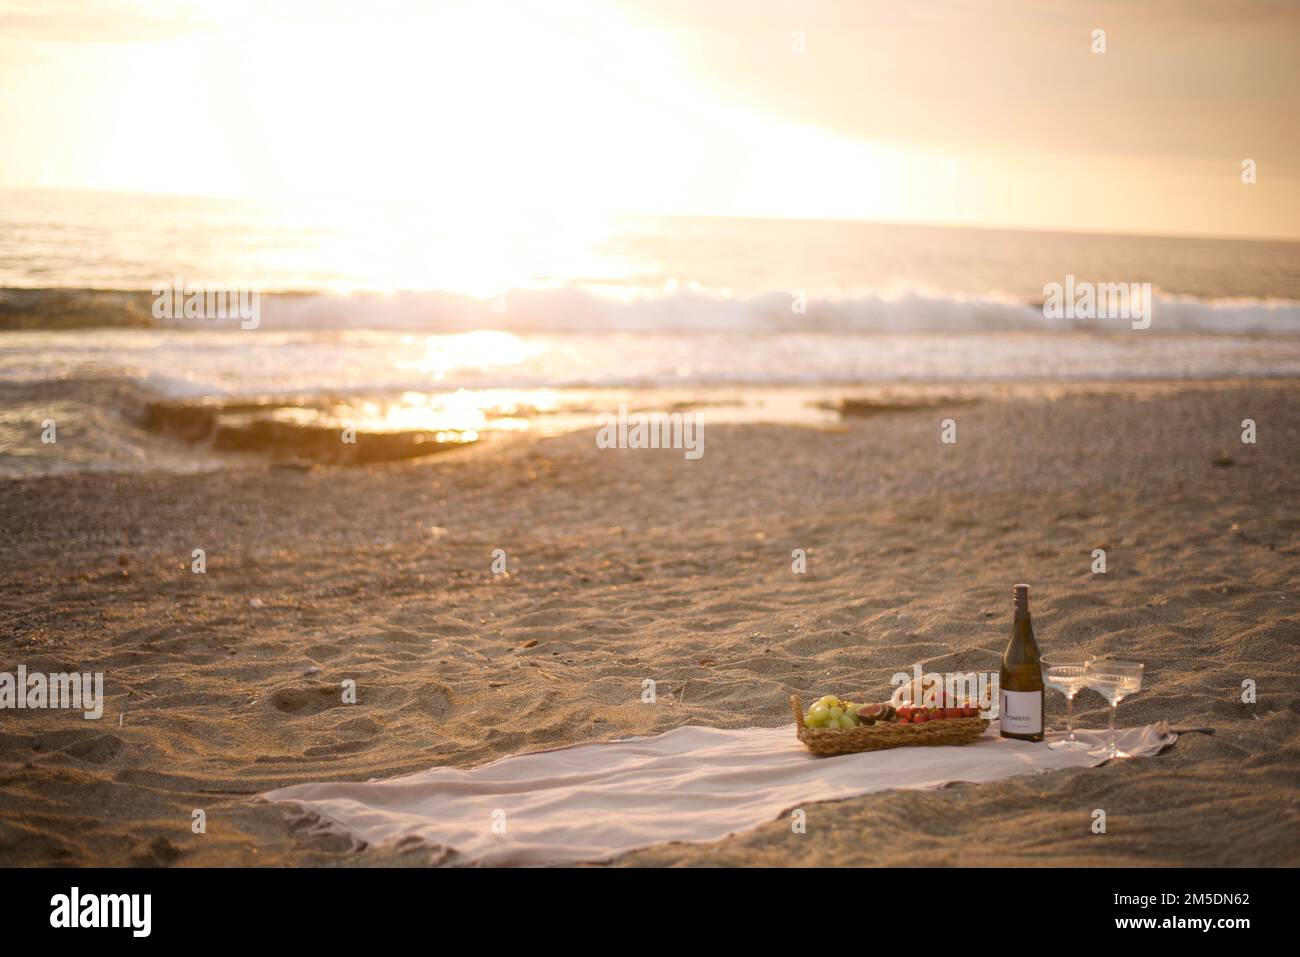 Romantic picnic by the sea at sunset Deserted beach in the warm rays of sunset Champagne and fruit basket Stock Photo